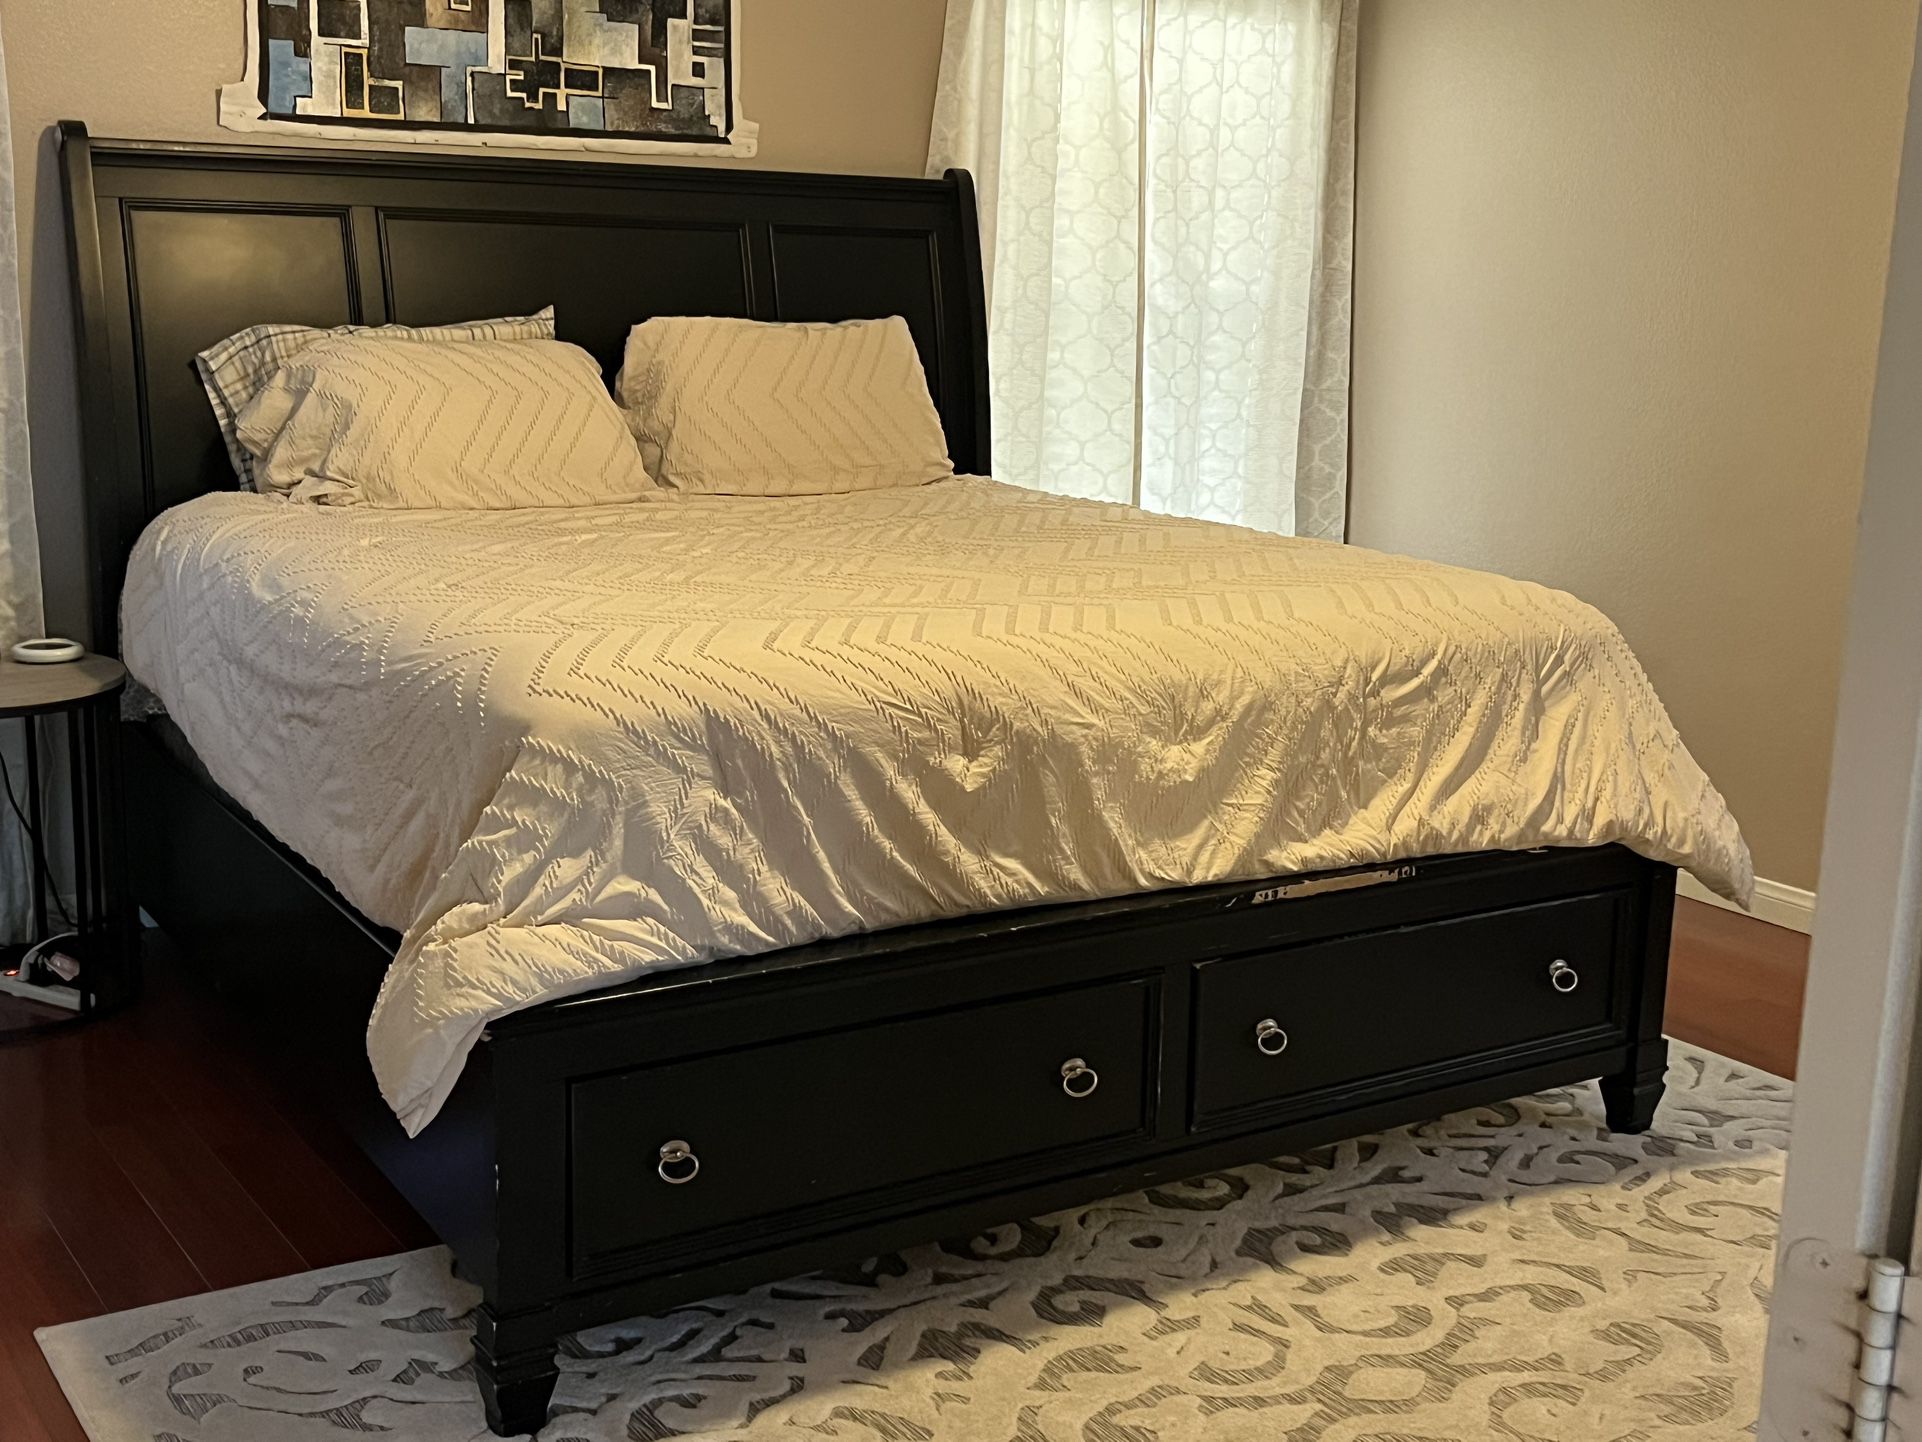 King Sized Bed Frame